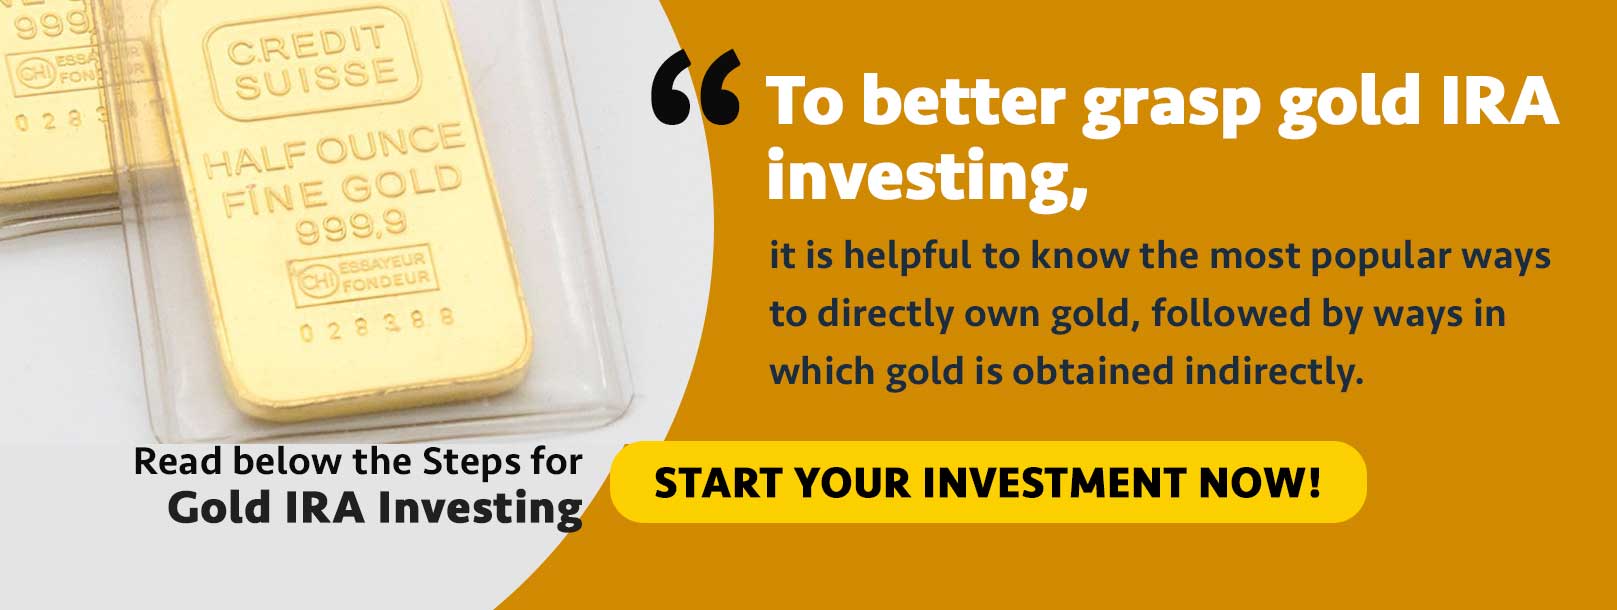 What $650 Buys You In gold as an investment